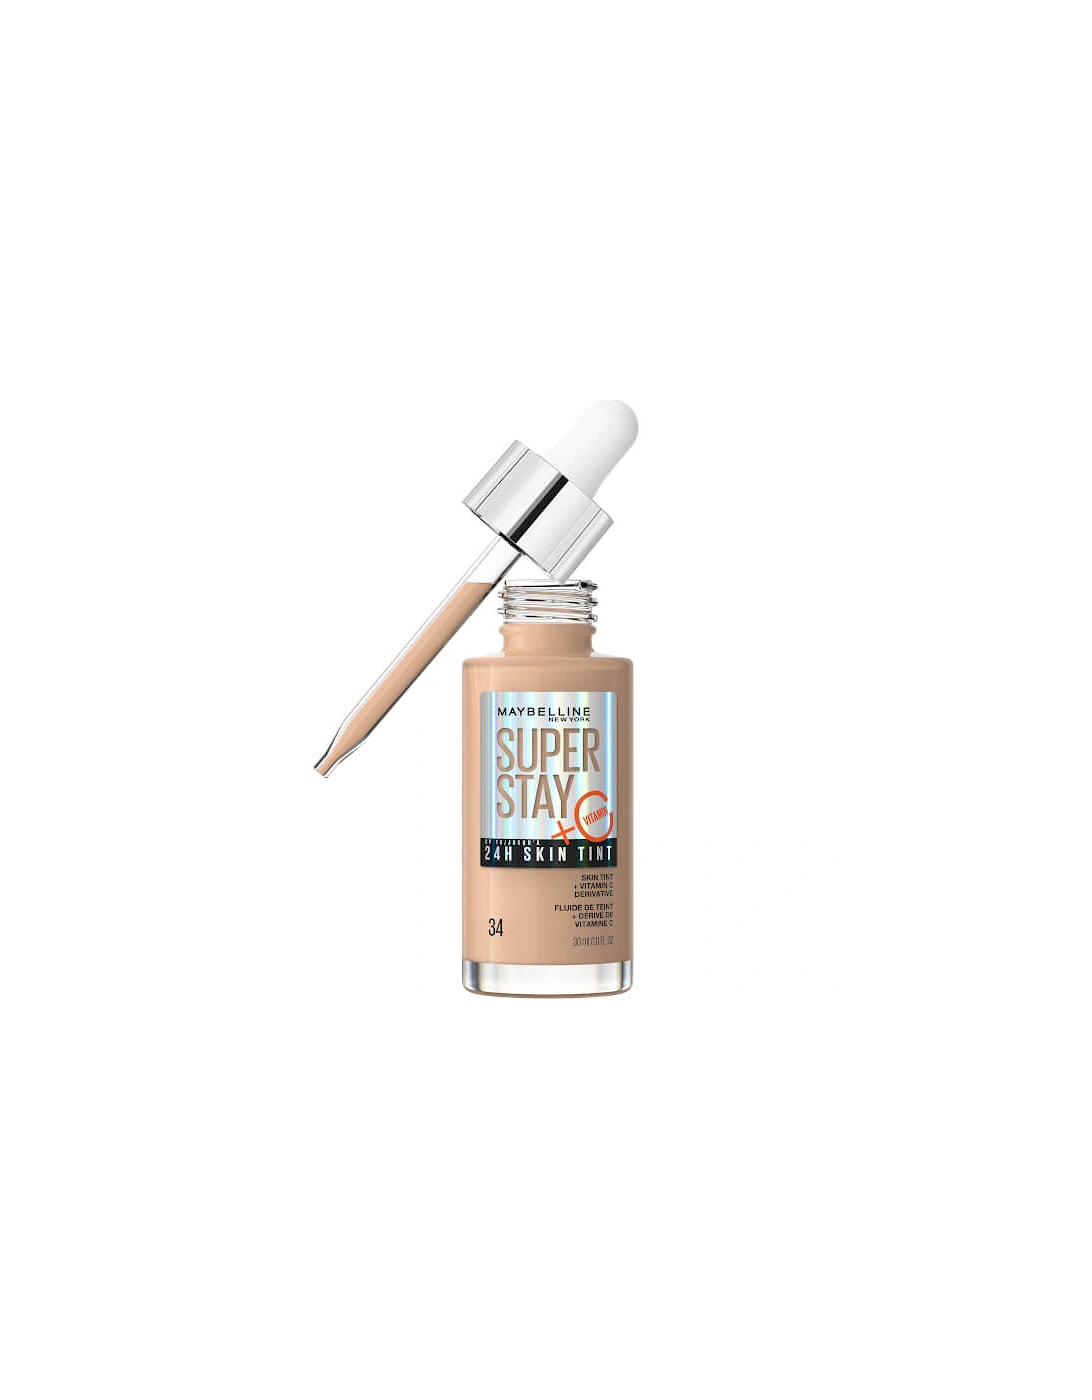 Super Stay up to 24H Skin Tint Foundation + Vitamin C - Shade 34, 2 of 1